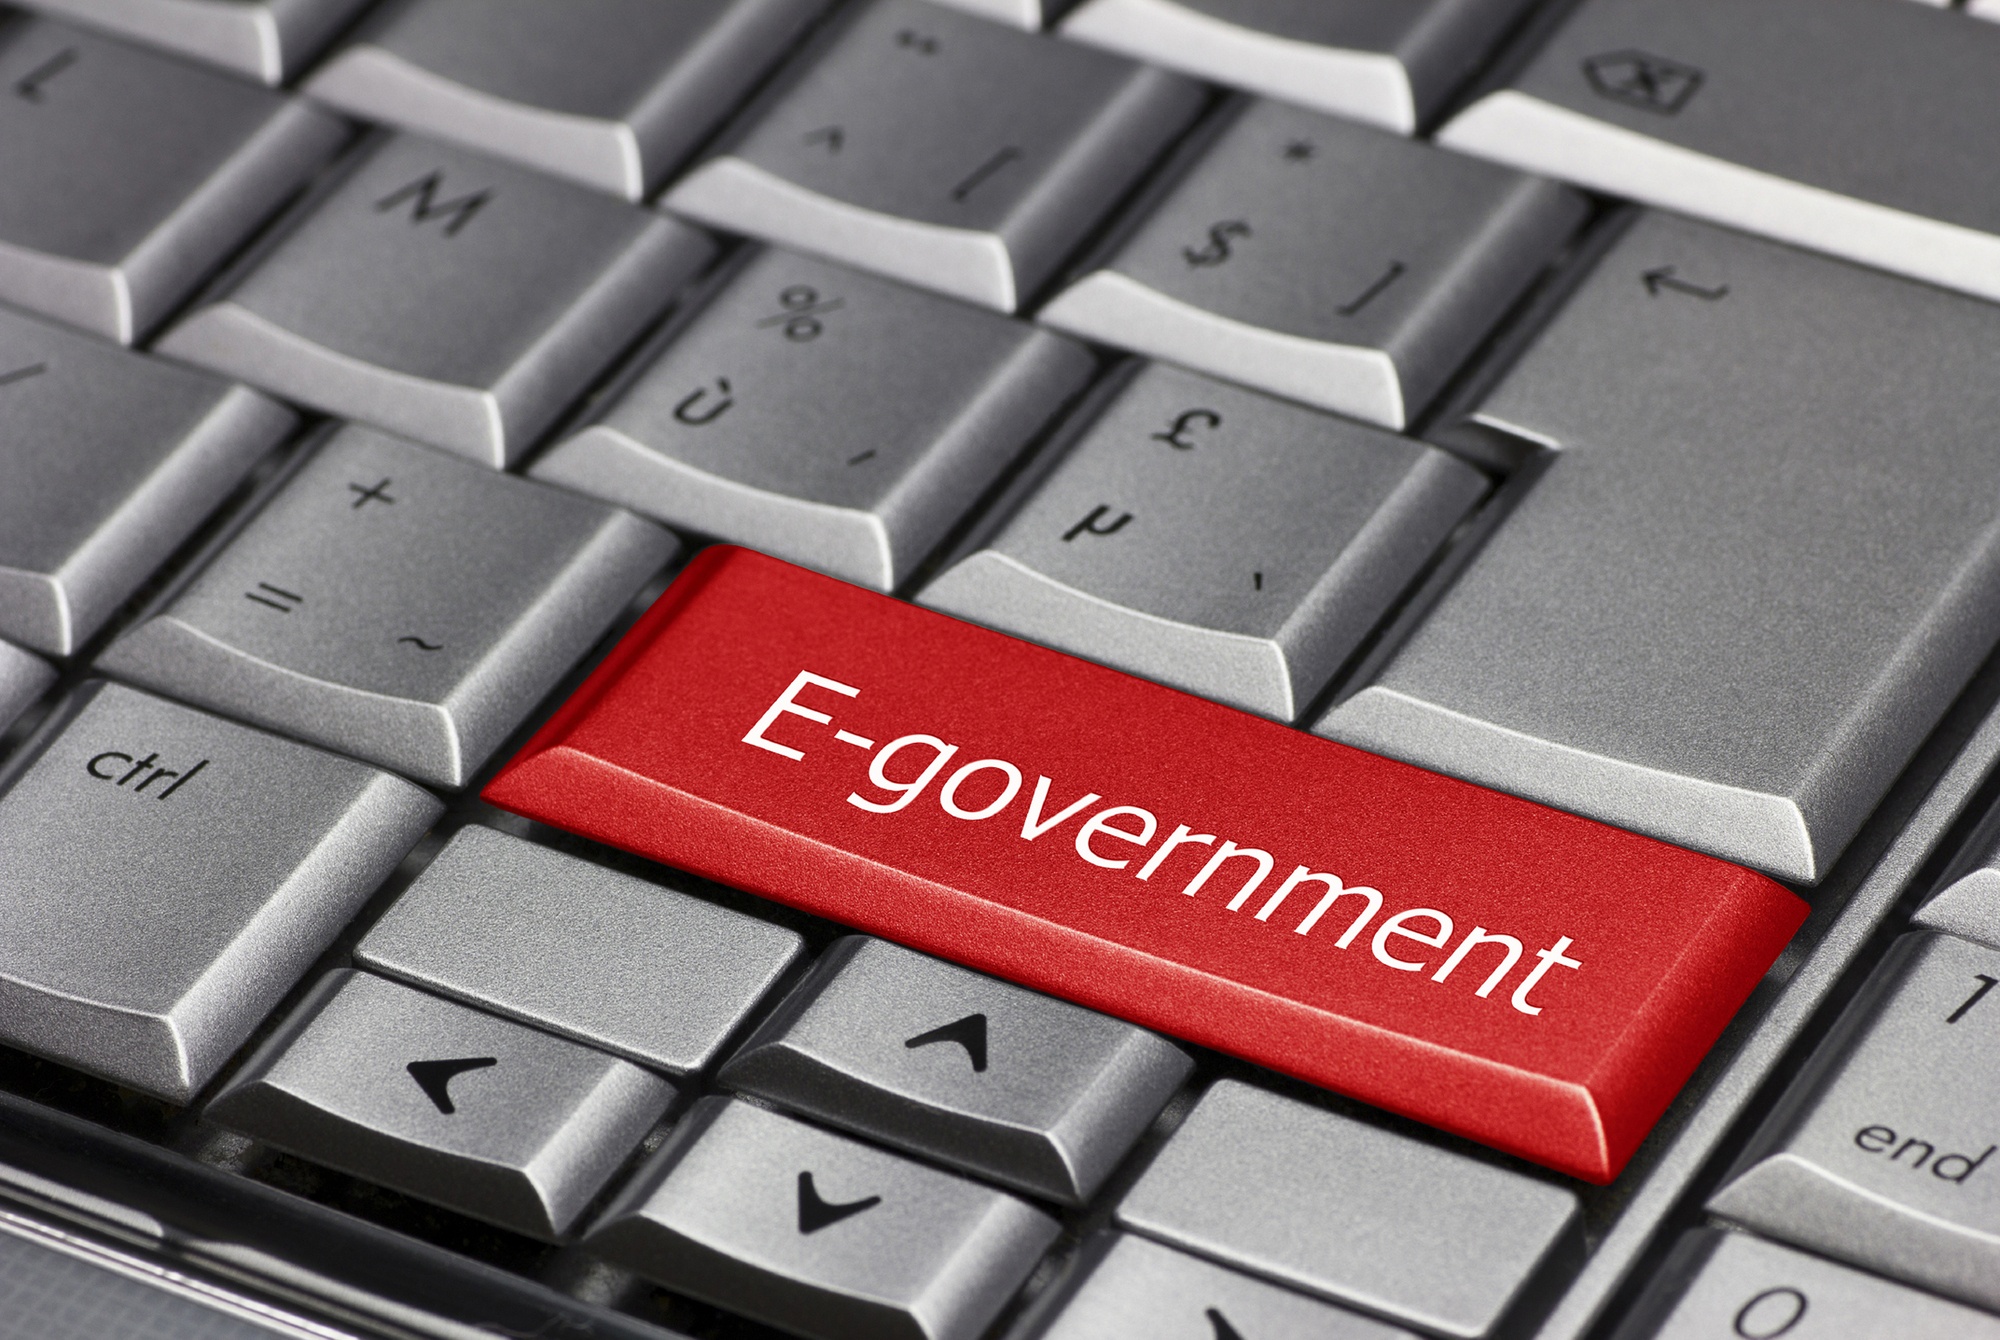 Next steps in digital government (E-Government)